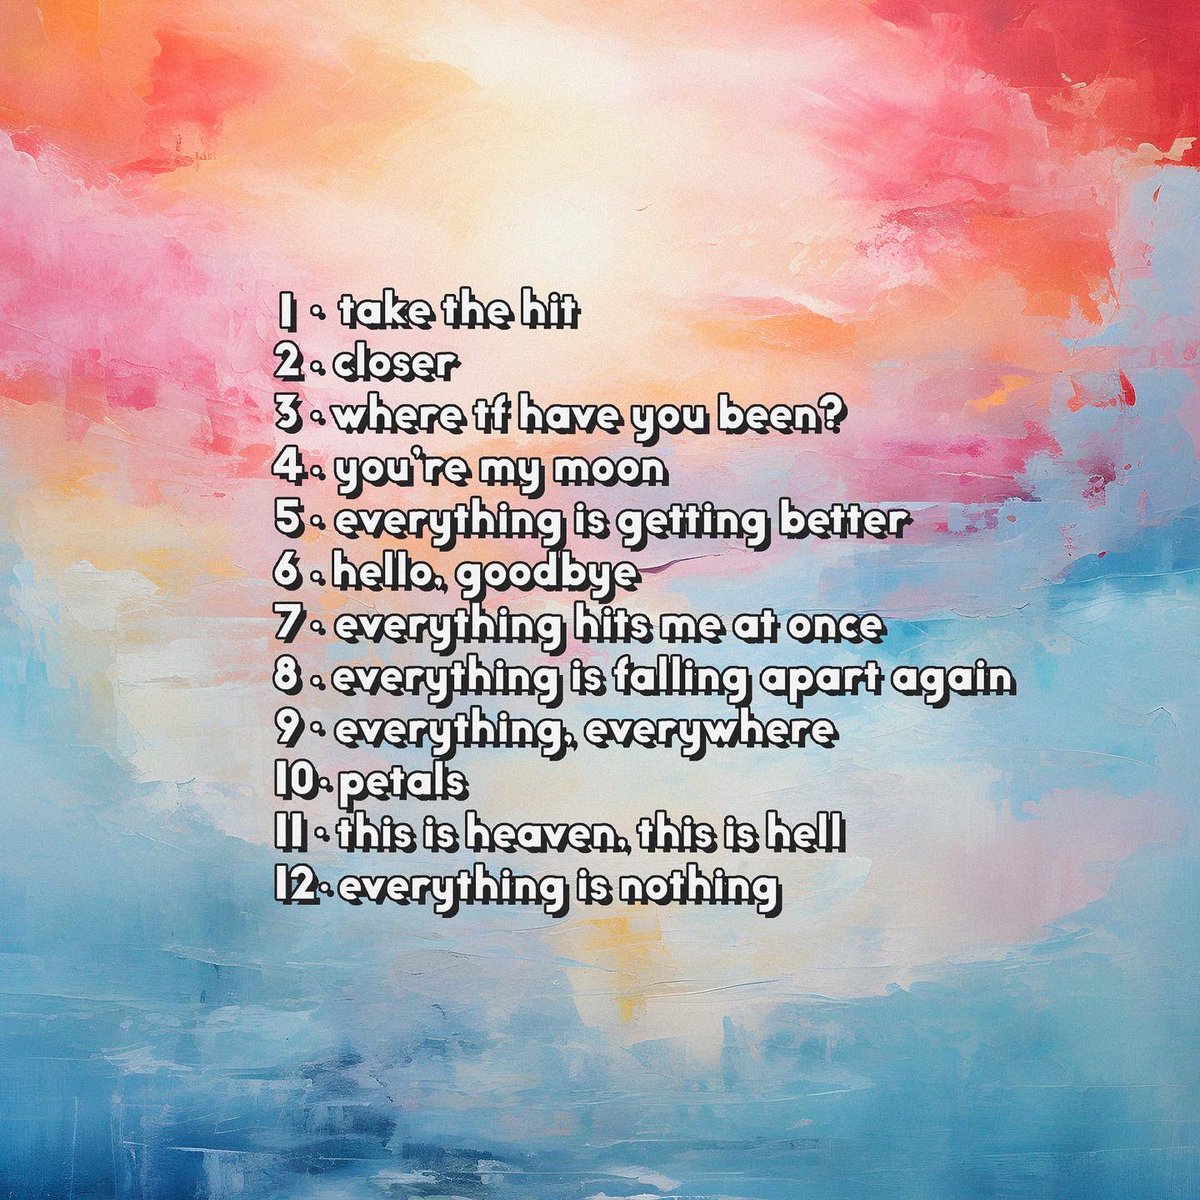 “EVERYTHING AND NOTHING” TRACKLIST REVEAL !!! which one are you most excited for? 🙃